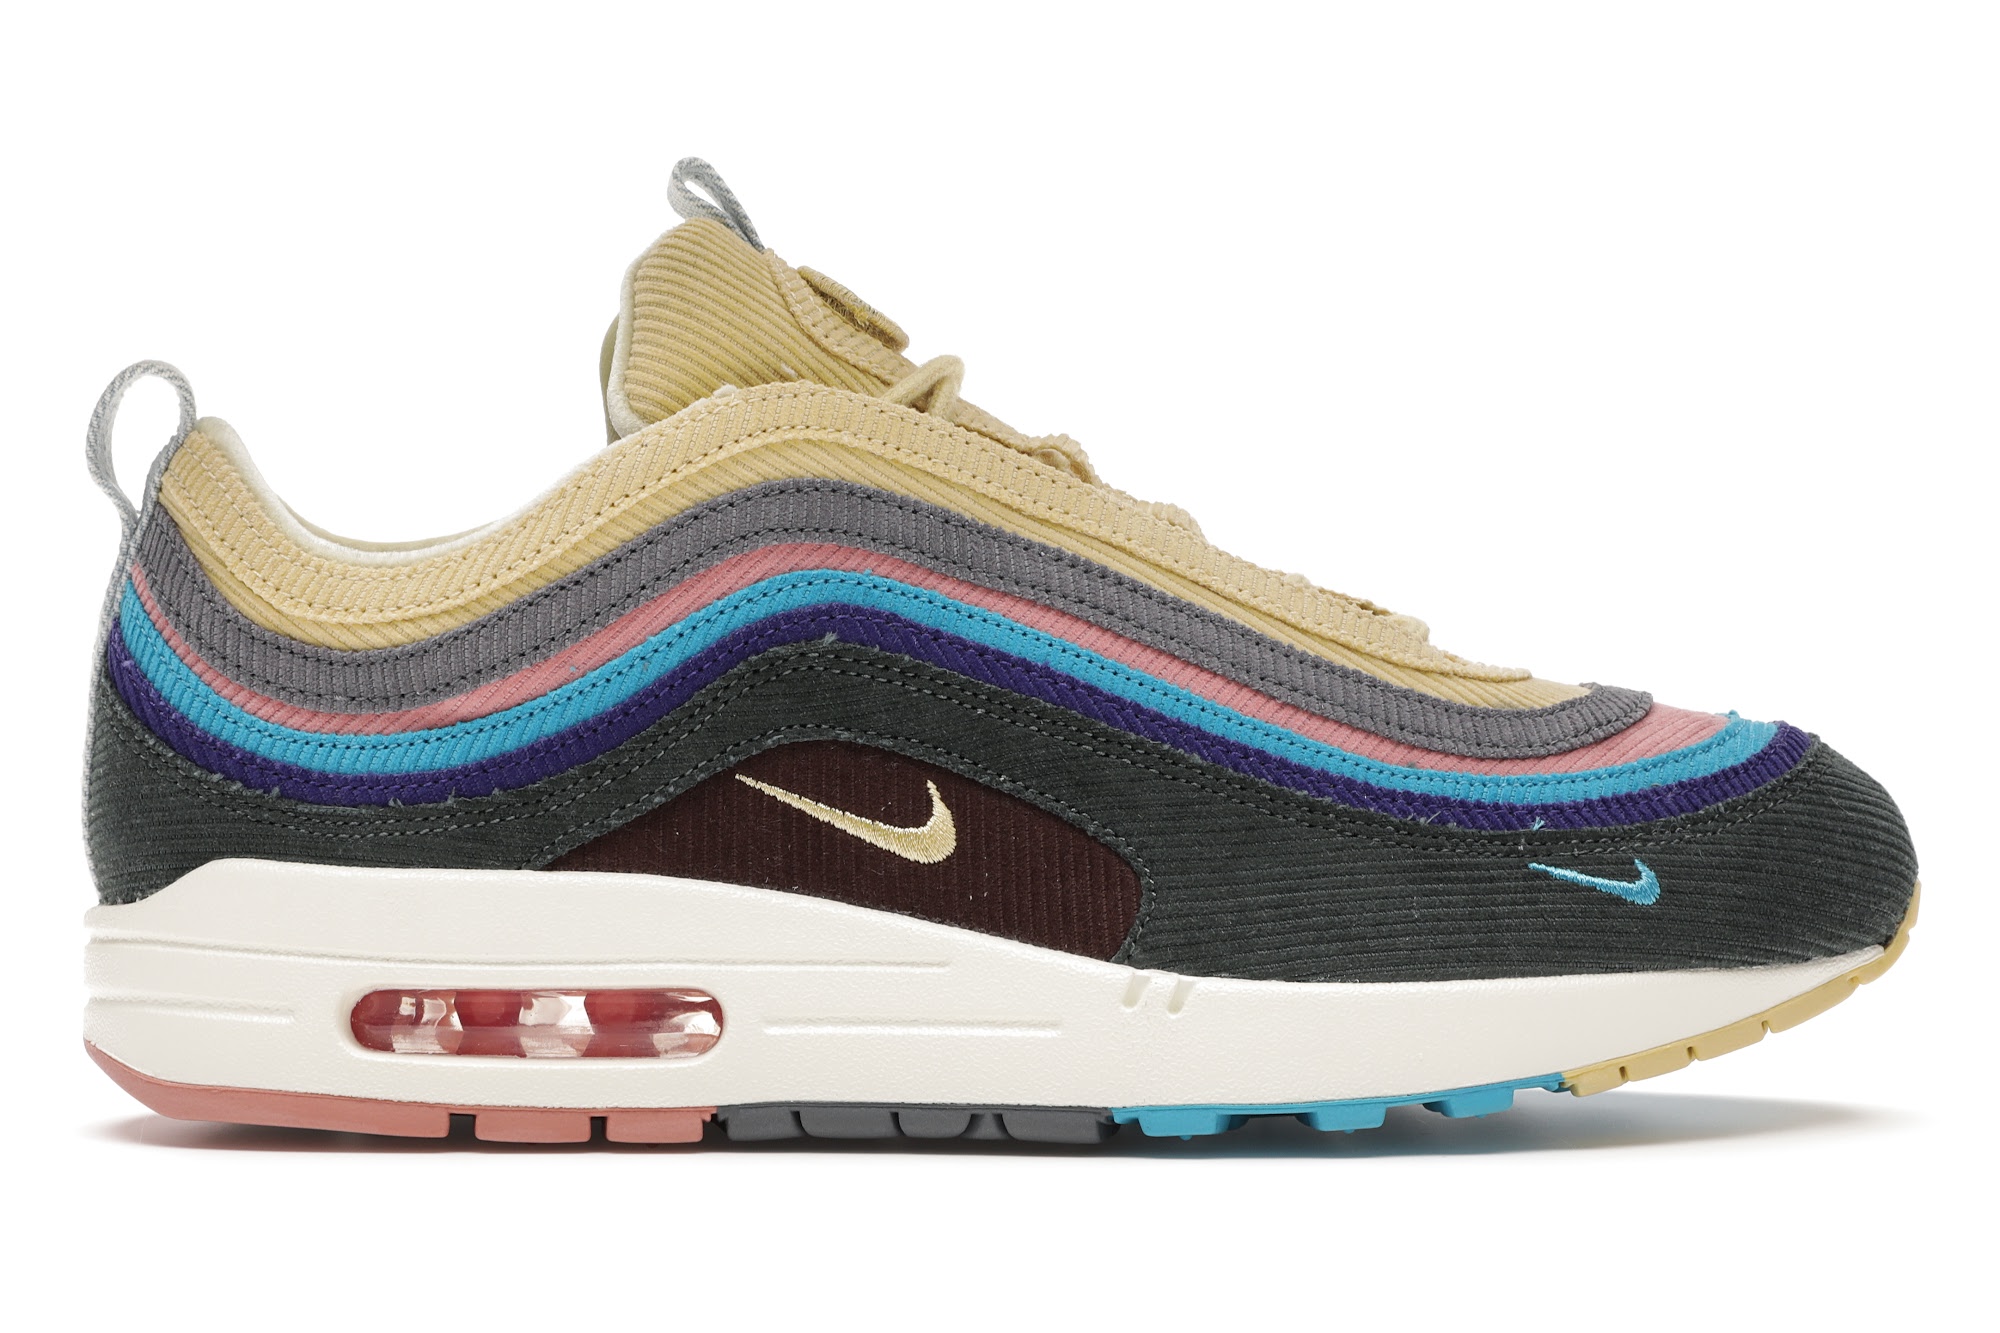 Nike Air Max 1/97 Sean Wotherspoon (All Accessories and Dustbag ...